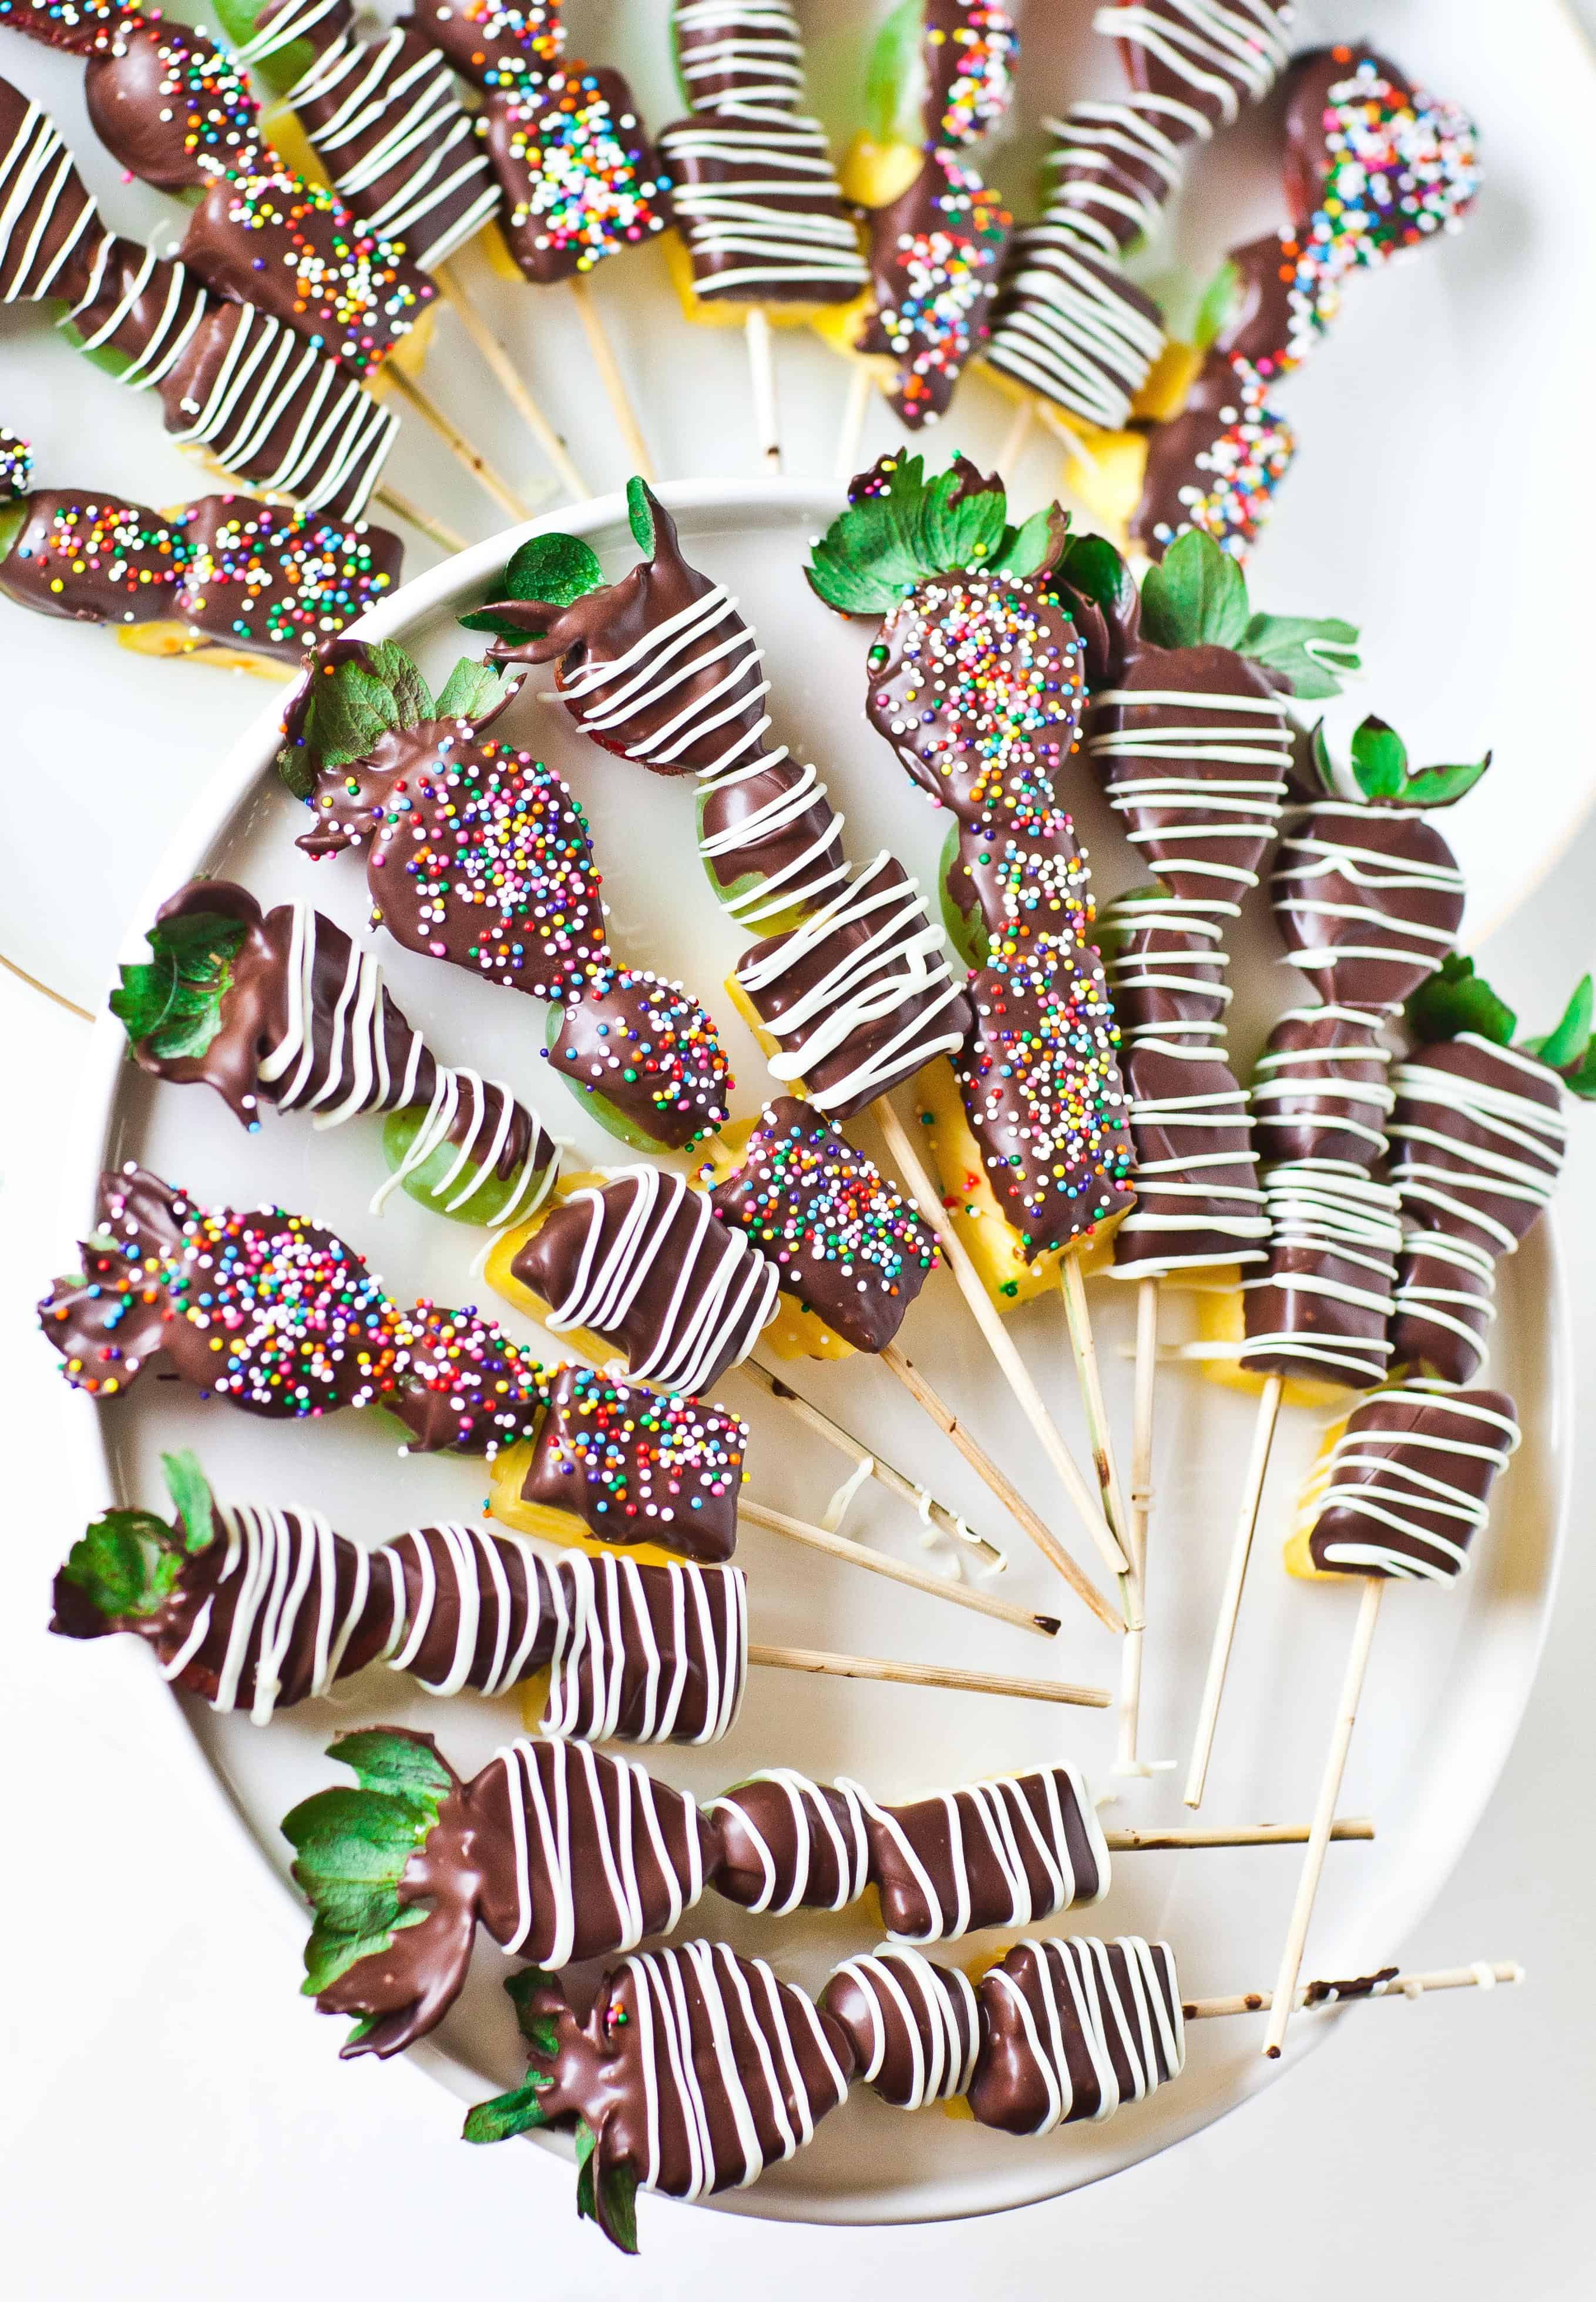 Chocolate covered fruit